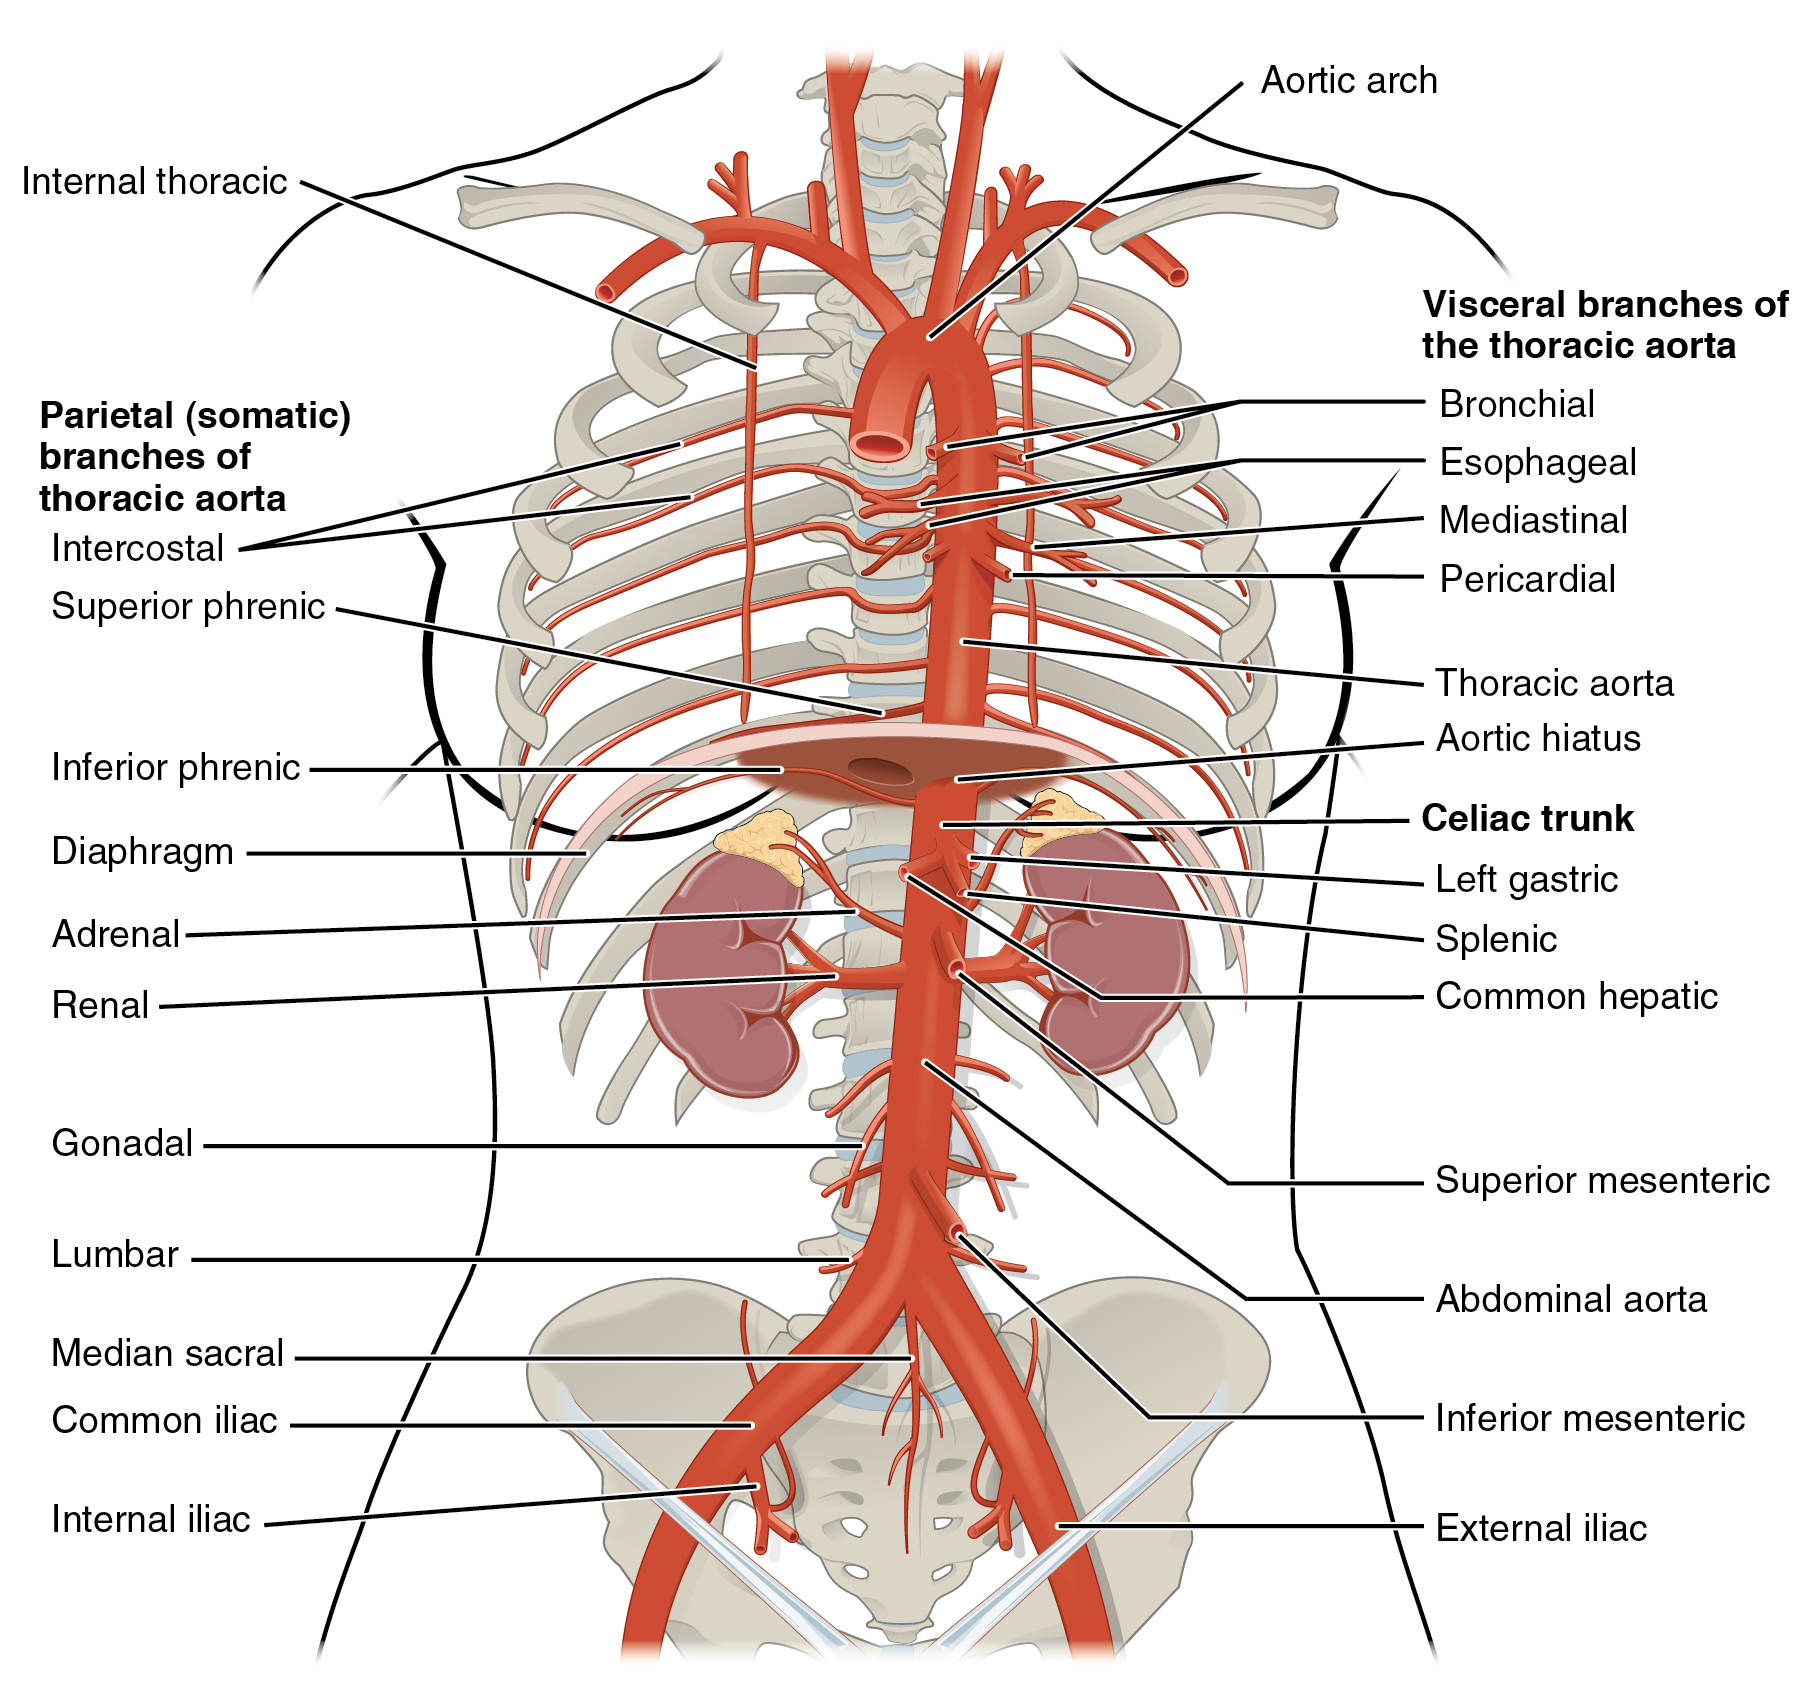 Thoracic aorta with branches labelled. Image description available.